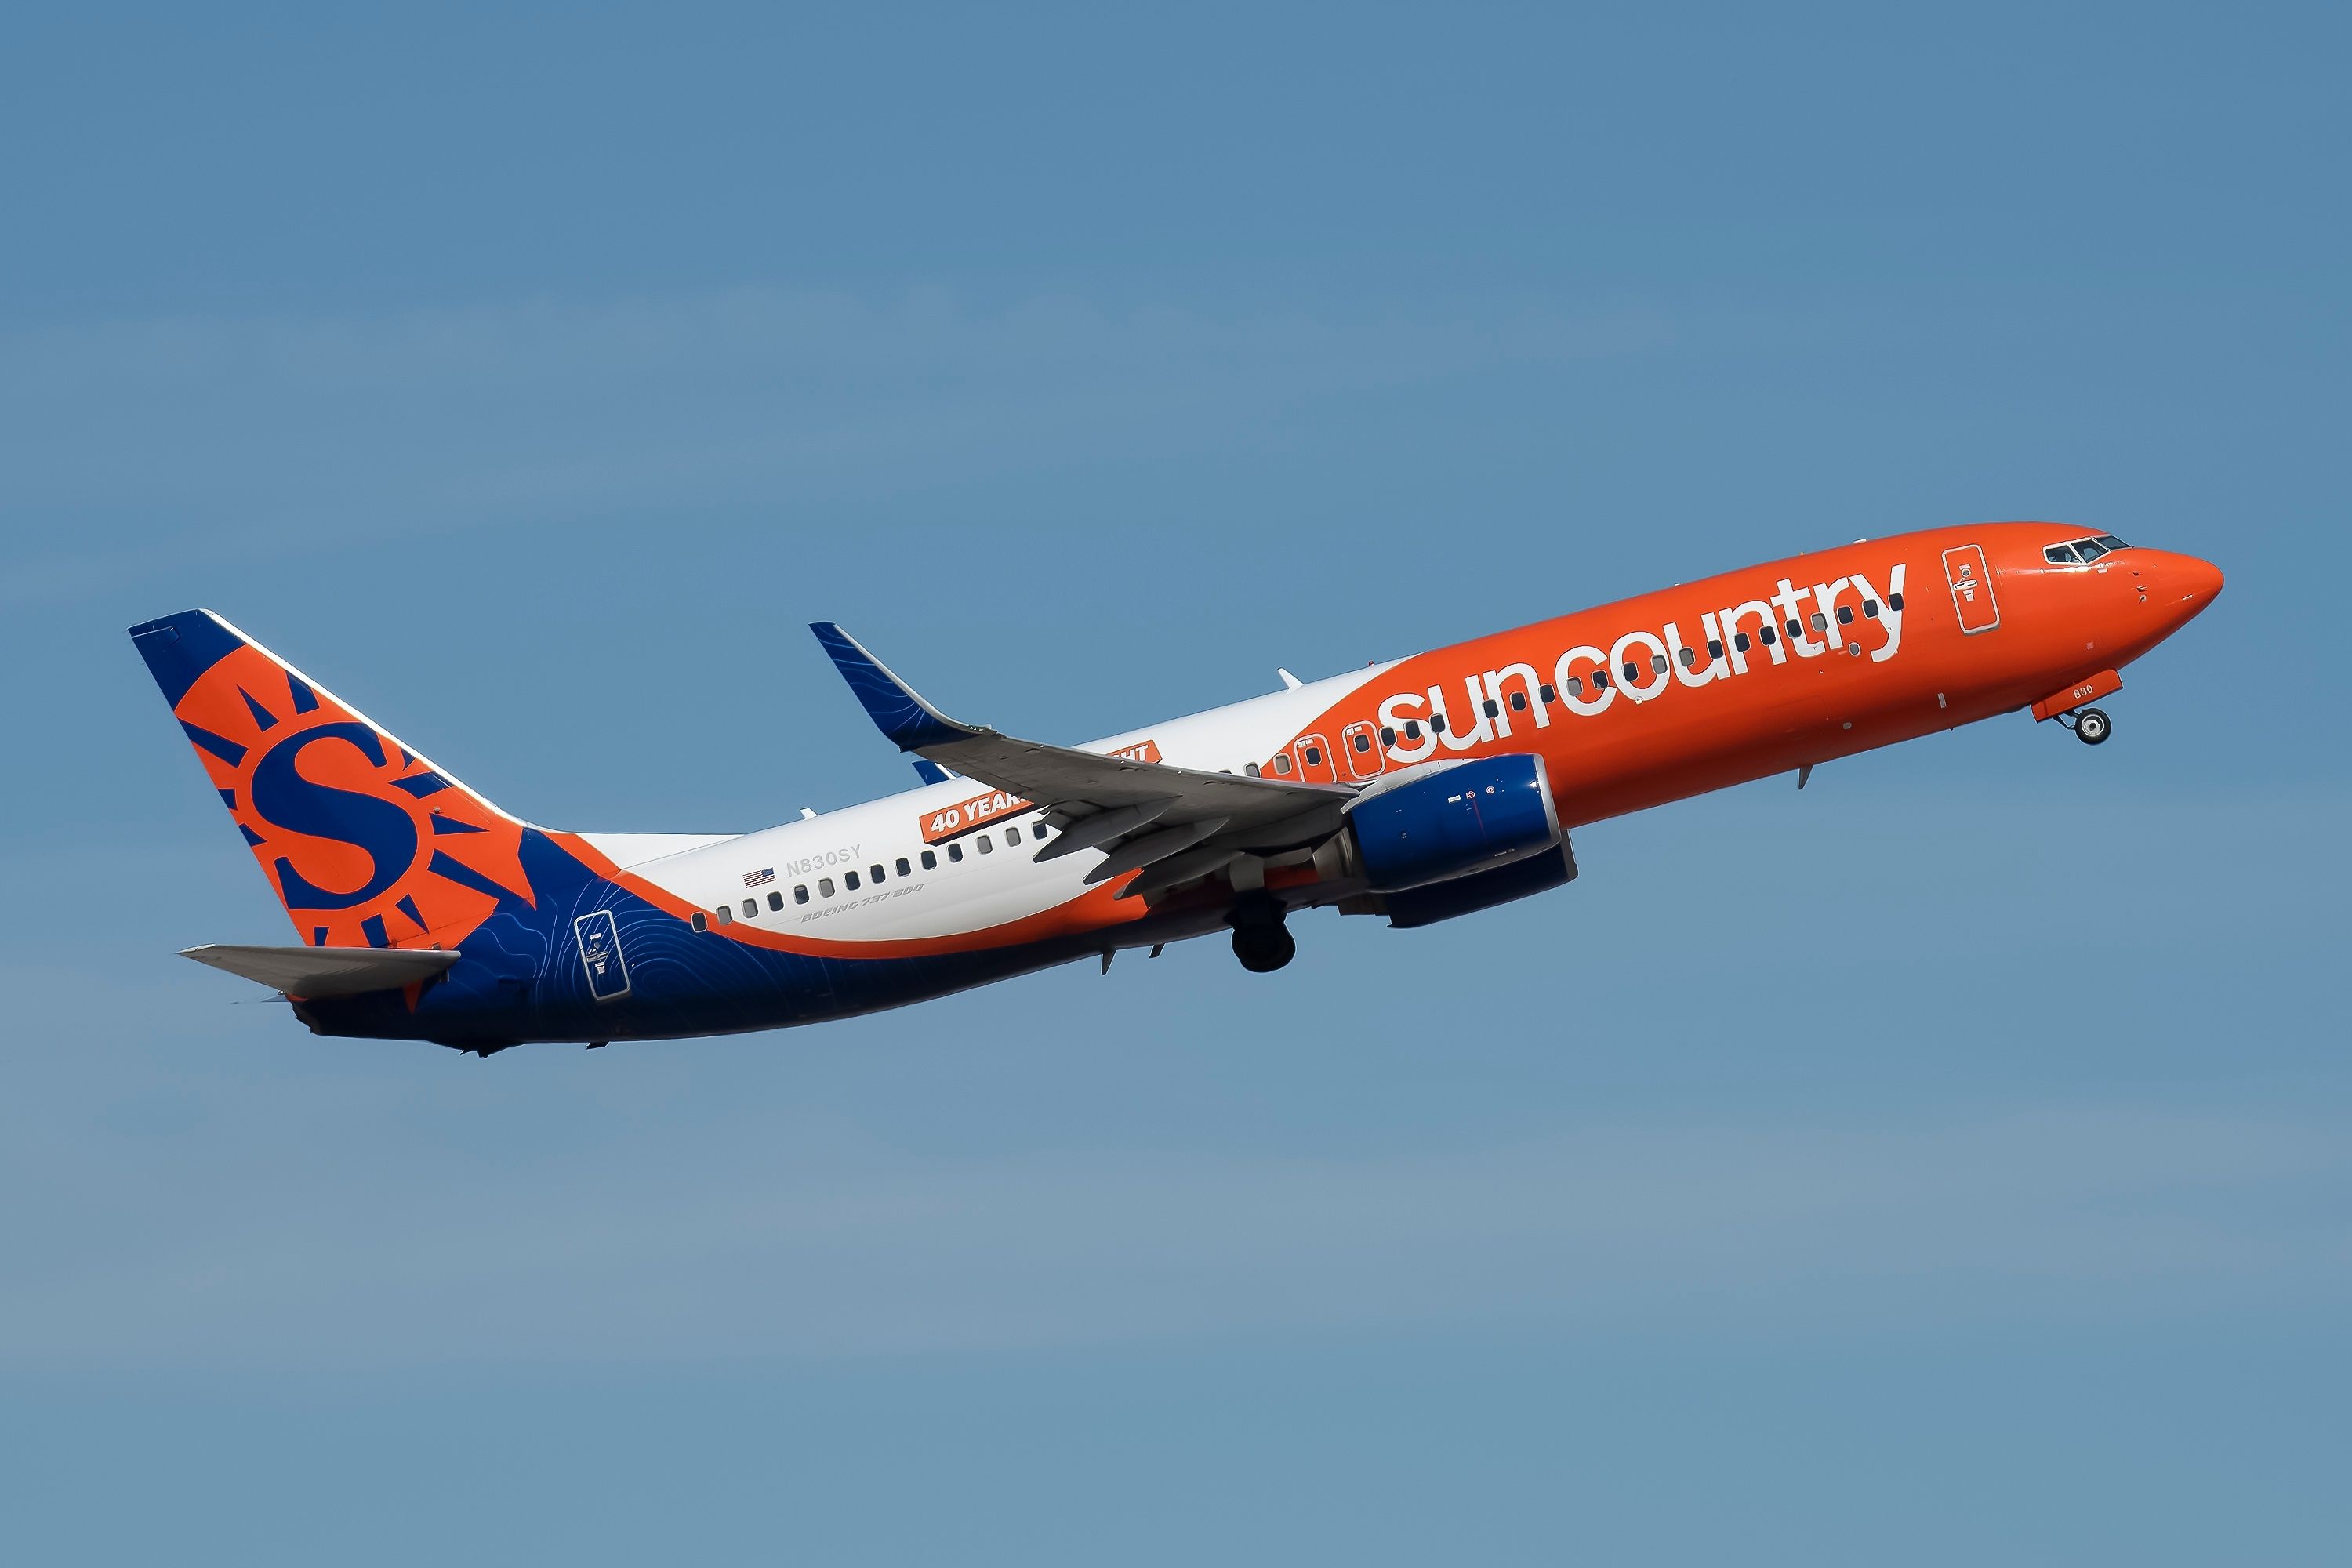 Sun Country Airlines Boeing 737-800 departing from Phoenix Sky Harbor Intertnational Airport.